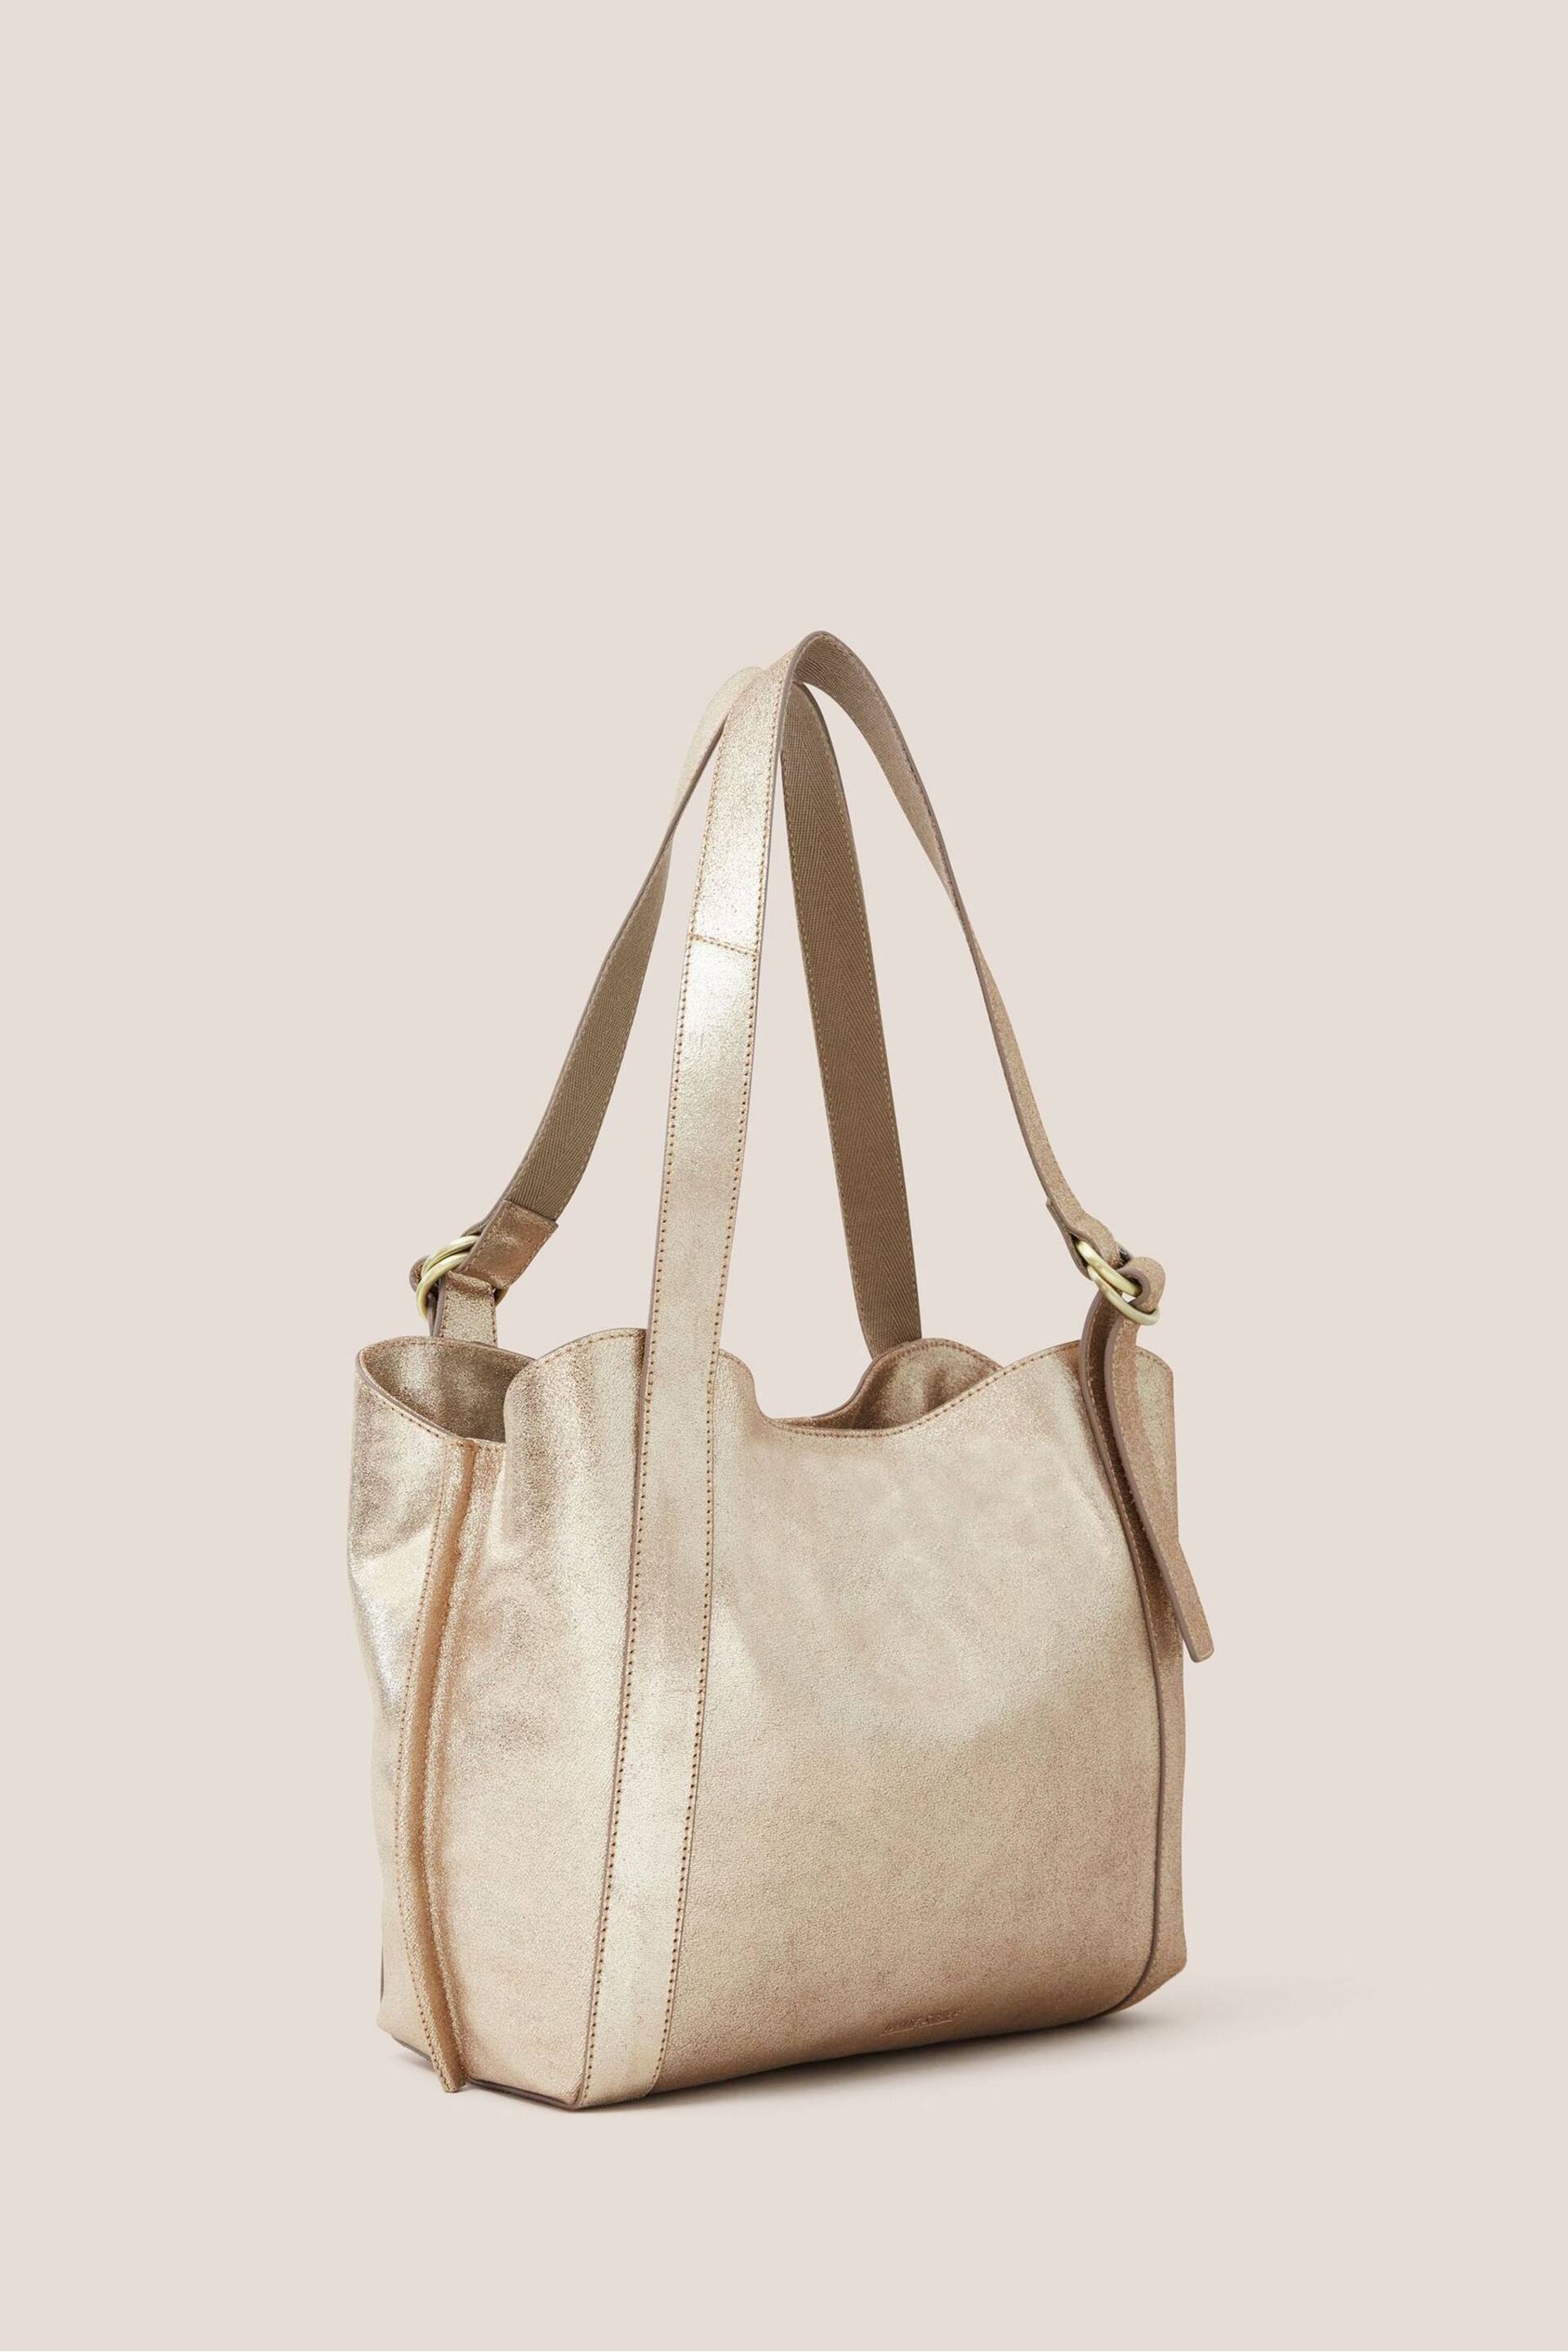 White Stuff Gold Hannah Leather Bag - Image 3 of 4